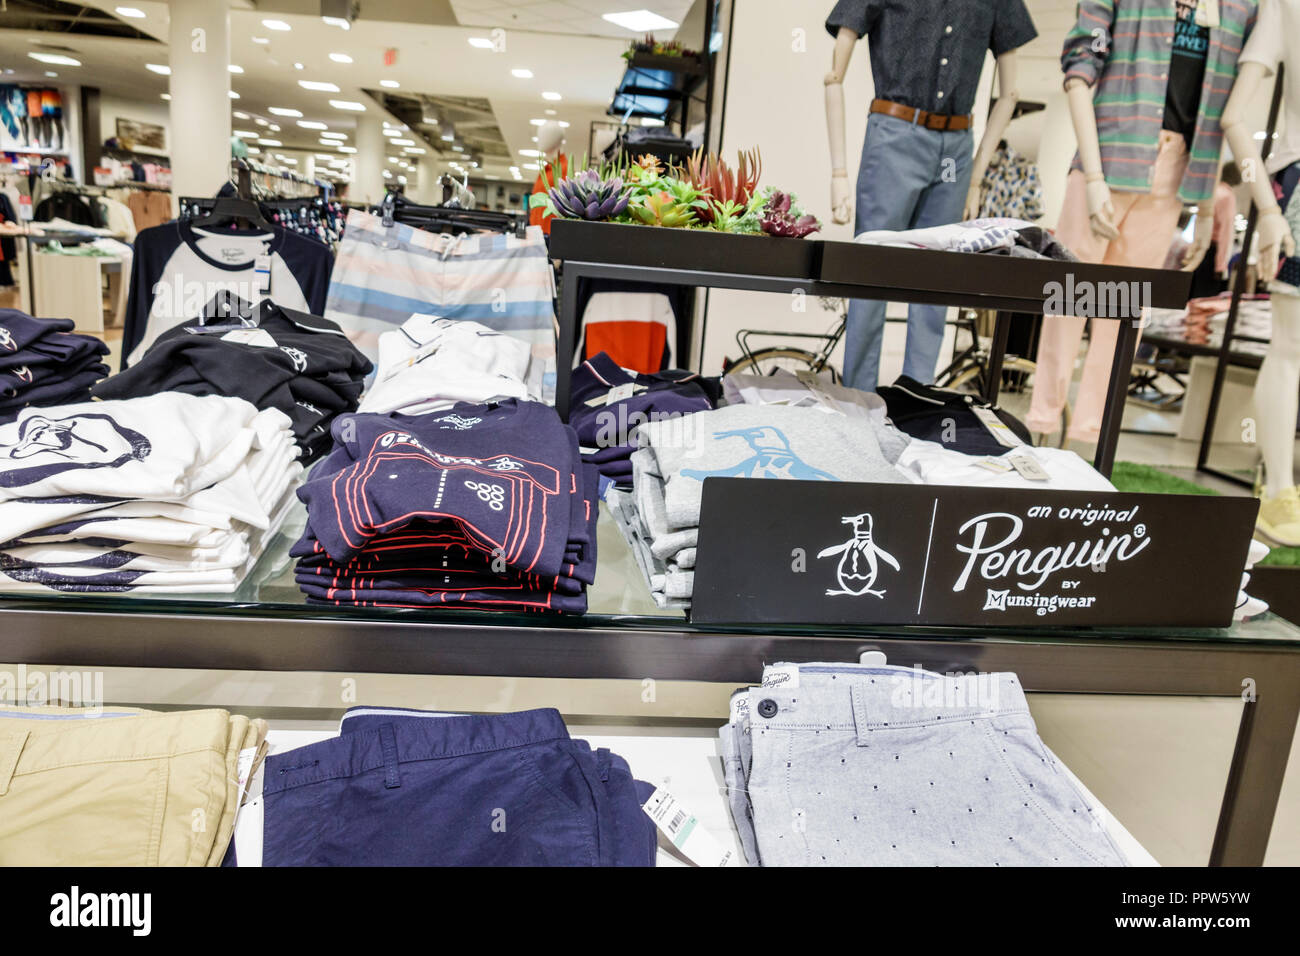 Miami Florida,Kendall,Dadeland mall,Macy's department store,inside  interior,product products display sale,Penguin sportswear clothing,visitors  travel Stock Photo - Alamy